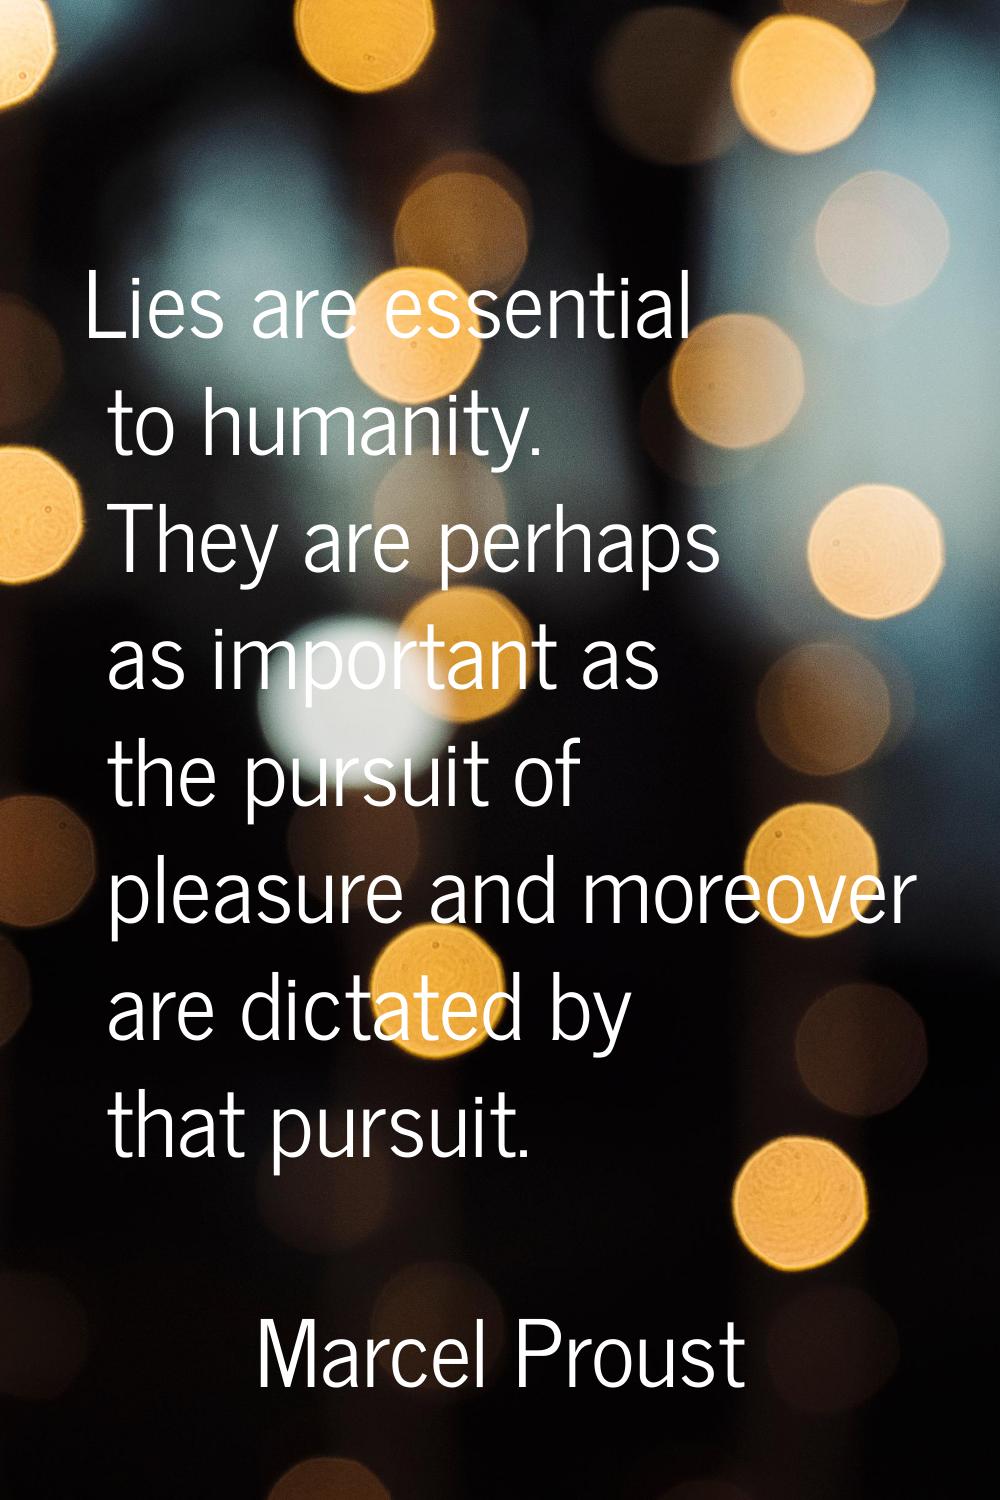 Lies are essential to humanity. They are perhaps as important as the pursuit of pleasure and moreov